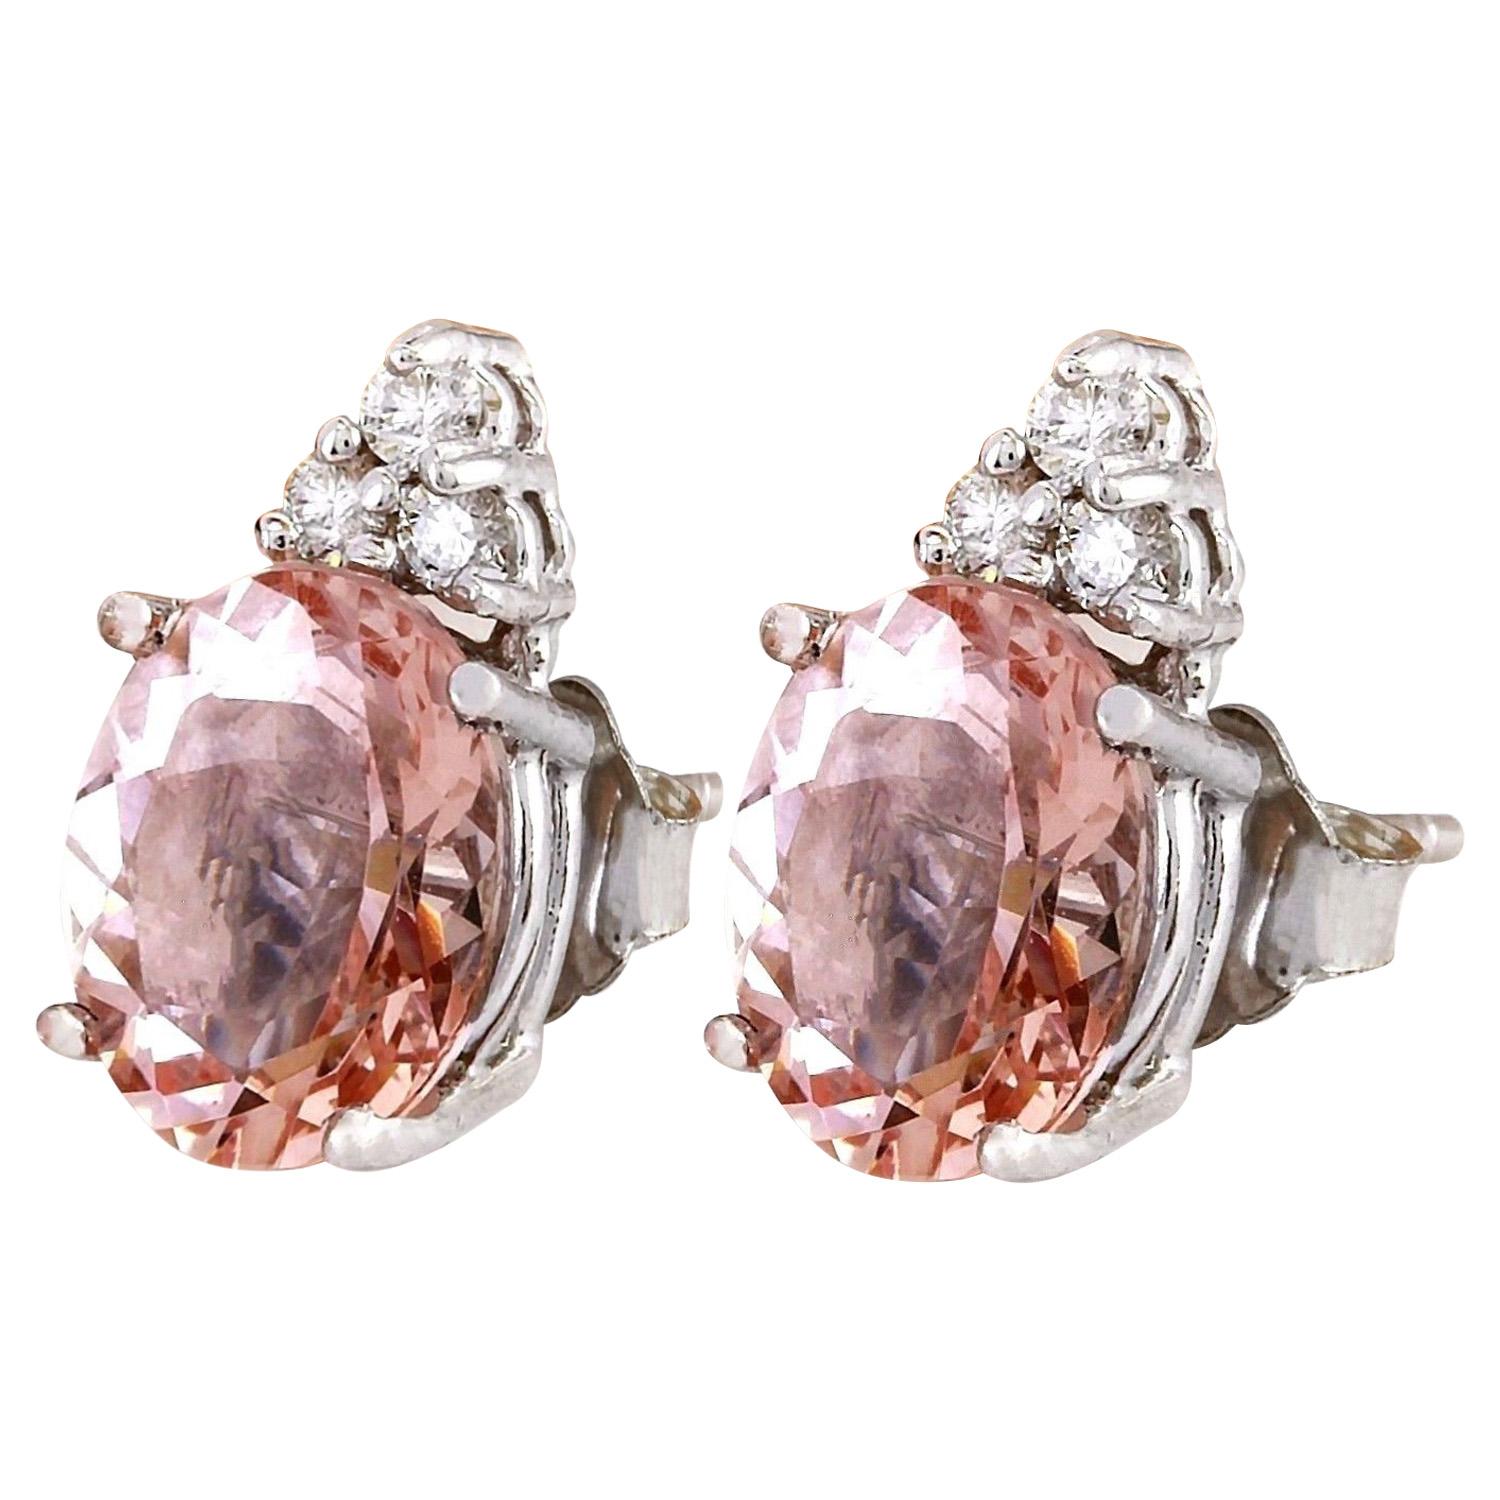 Introducing our stunning 14K Solid White Gold Diamond Earrings featuring a breathtaking 3.20 Carat Natural Morganite gemstone. These elegant studs, designed with sophistication in mind, showcase a mesmerizing oval-shaped Morganite weighing 3.08